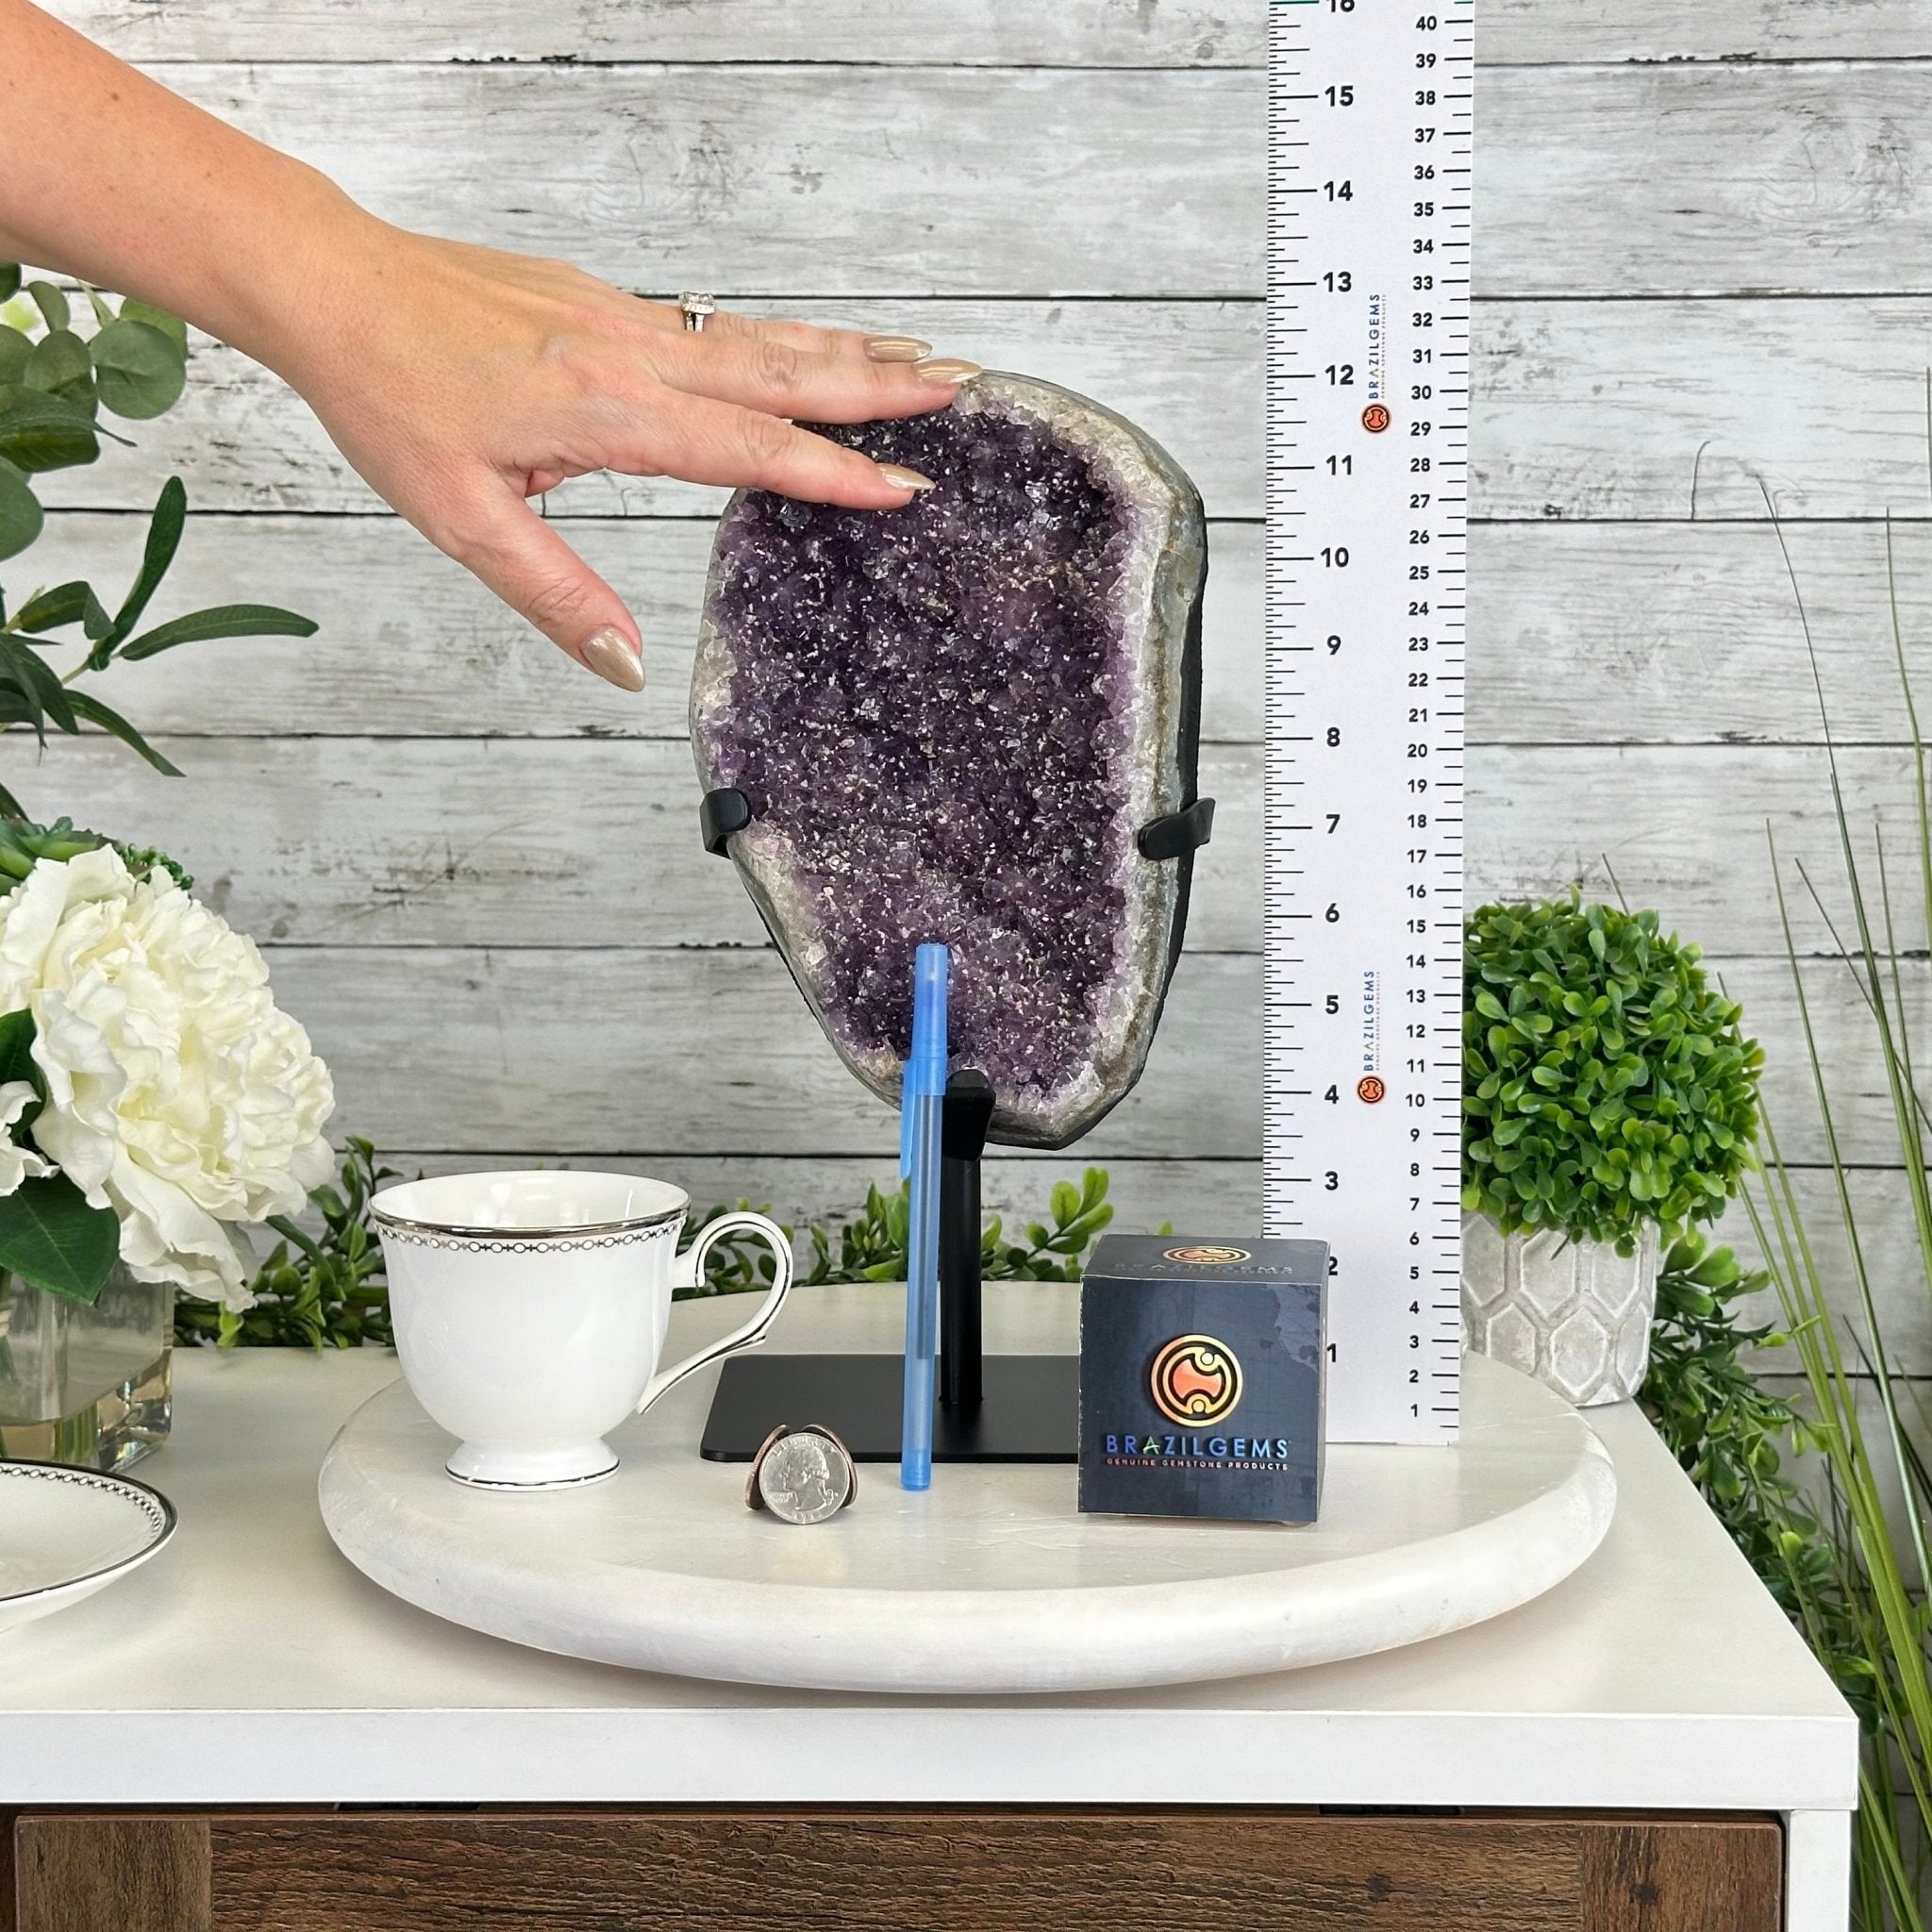 Quality Amethyst Cluster on a Metal Base, 10.9 lbs & 12.25" Tall #5491 - 0047 - Brazil GemsBrazil GemsQuality Amethyst Cluster on a Metal Base, 10.9 lbs & 12.25" Tall #5491 - 0047Clusters on Fixed Bases5491 - 0047